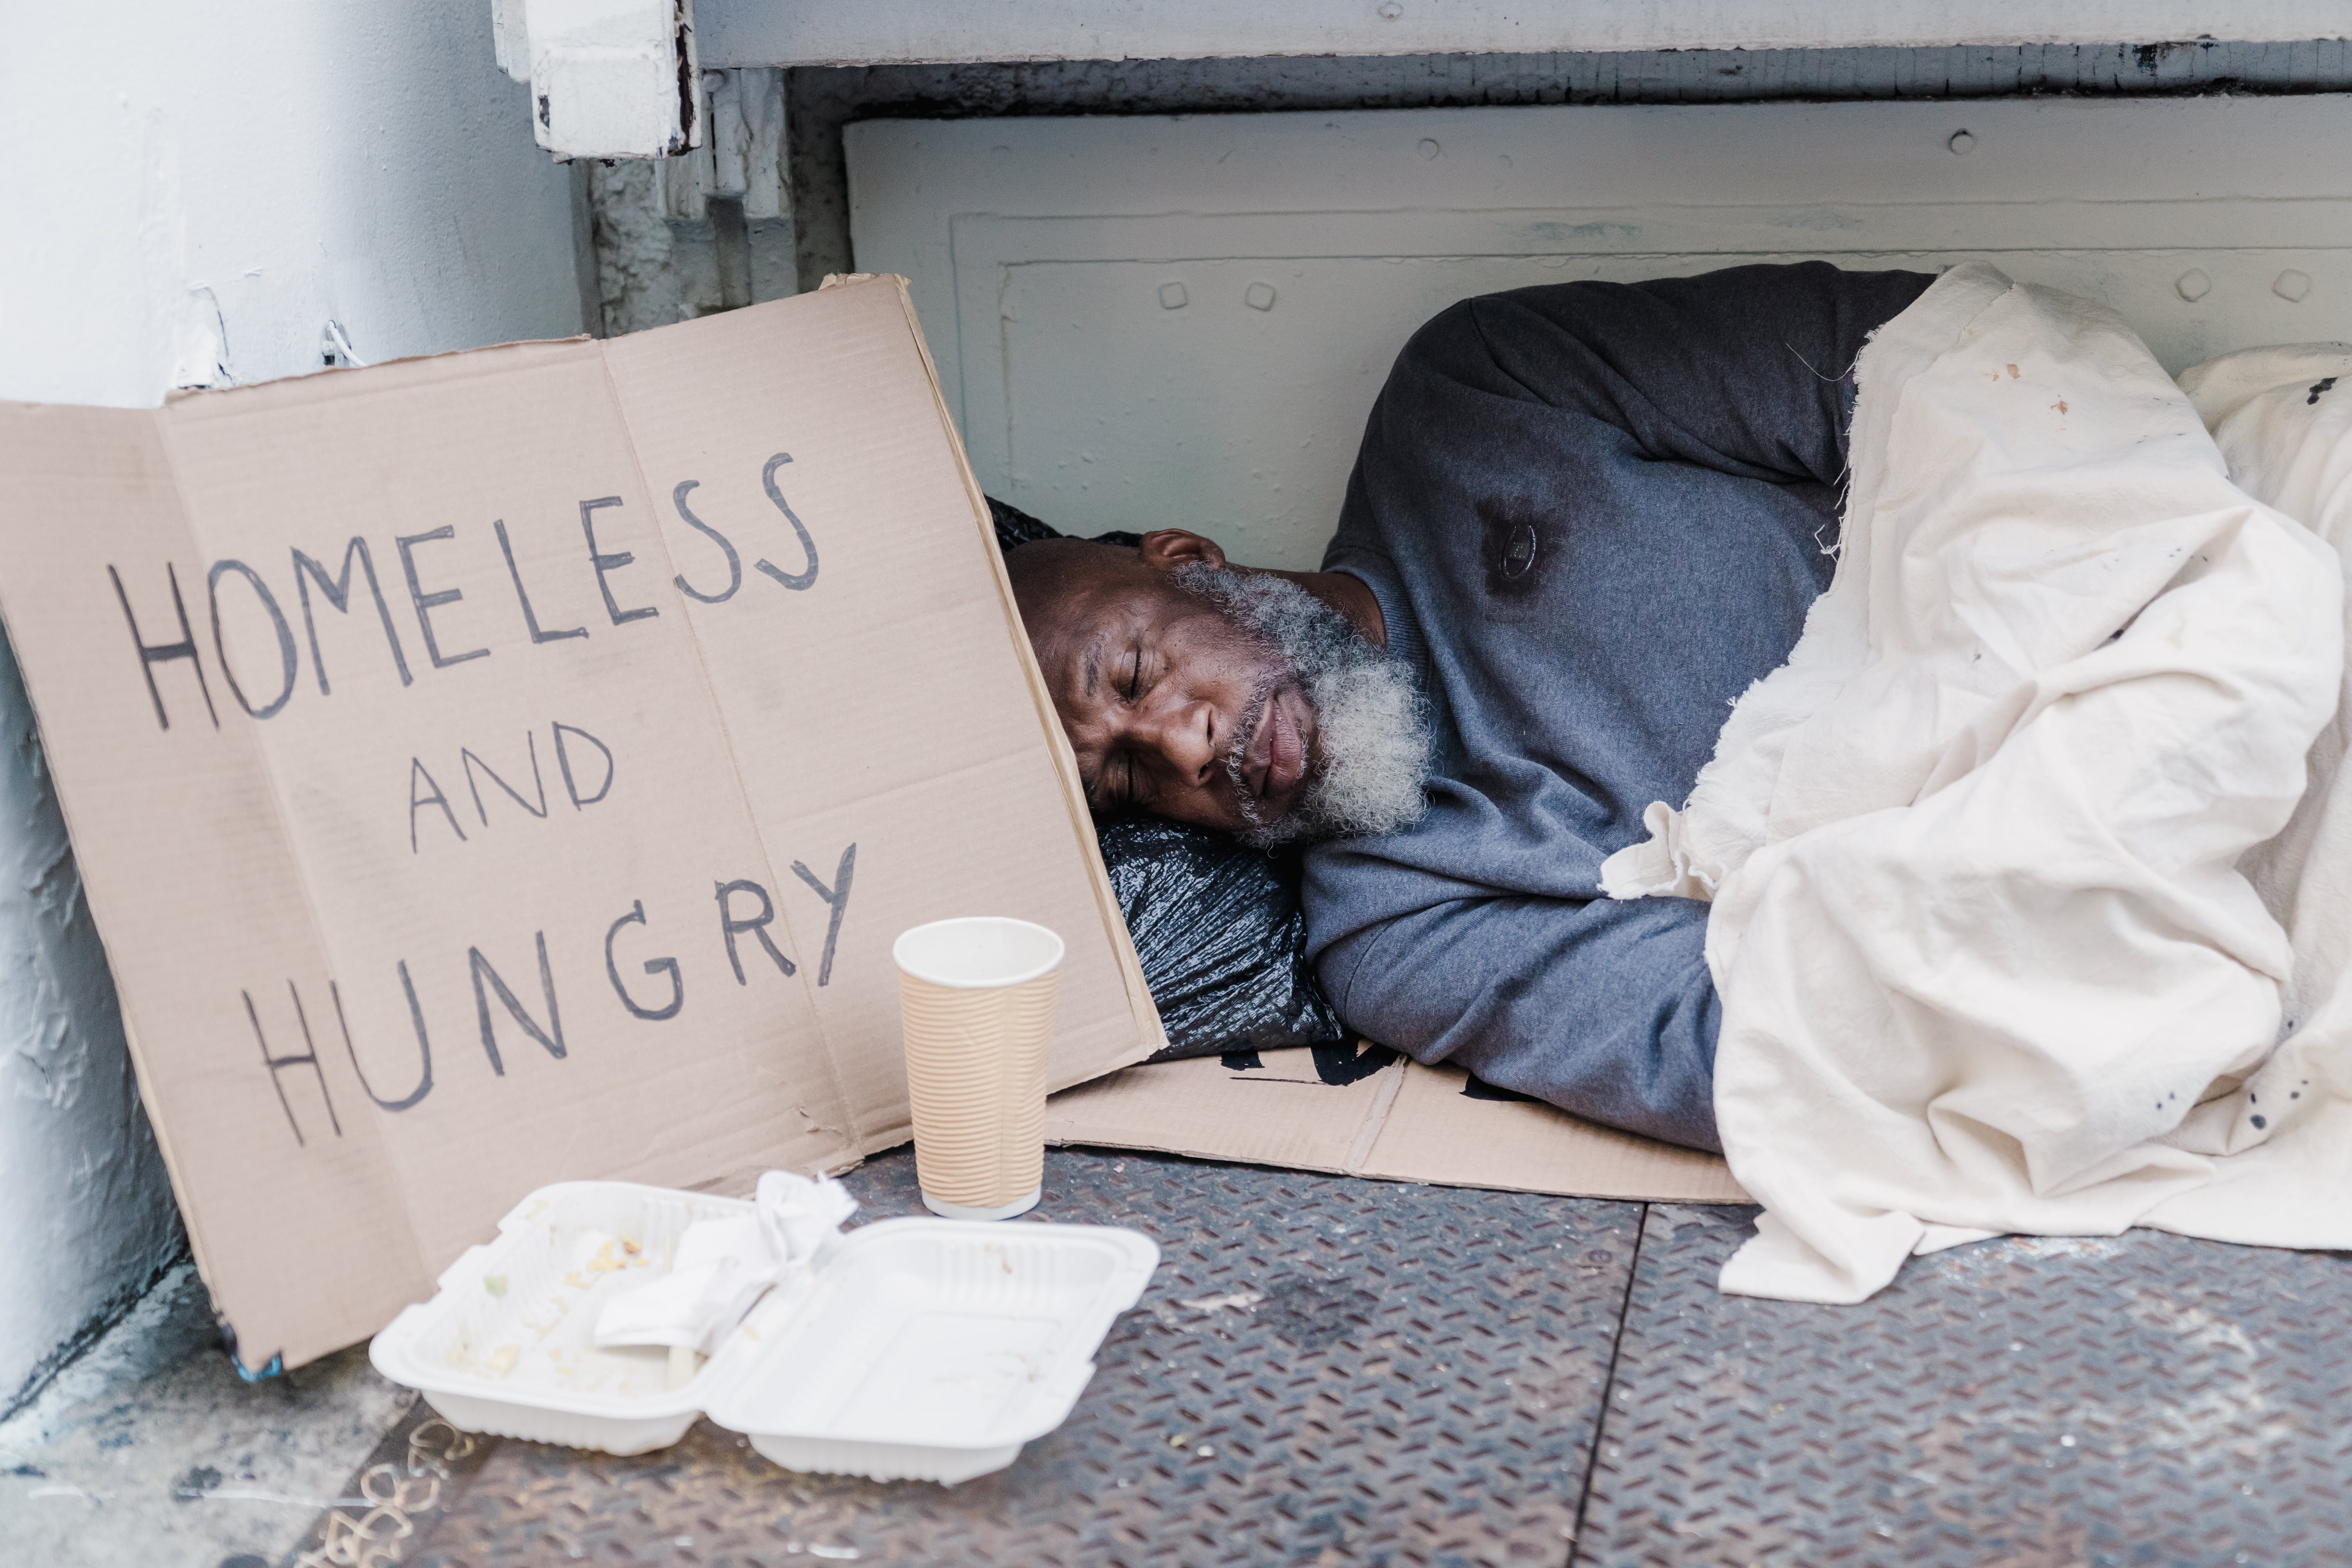 A homeless person sleeping. | Source: Pexels